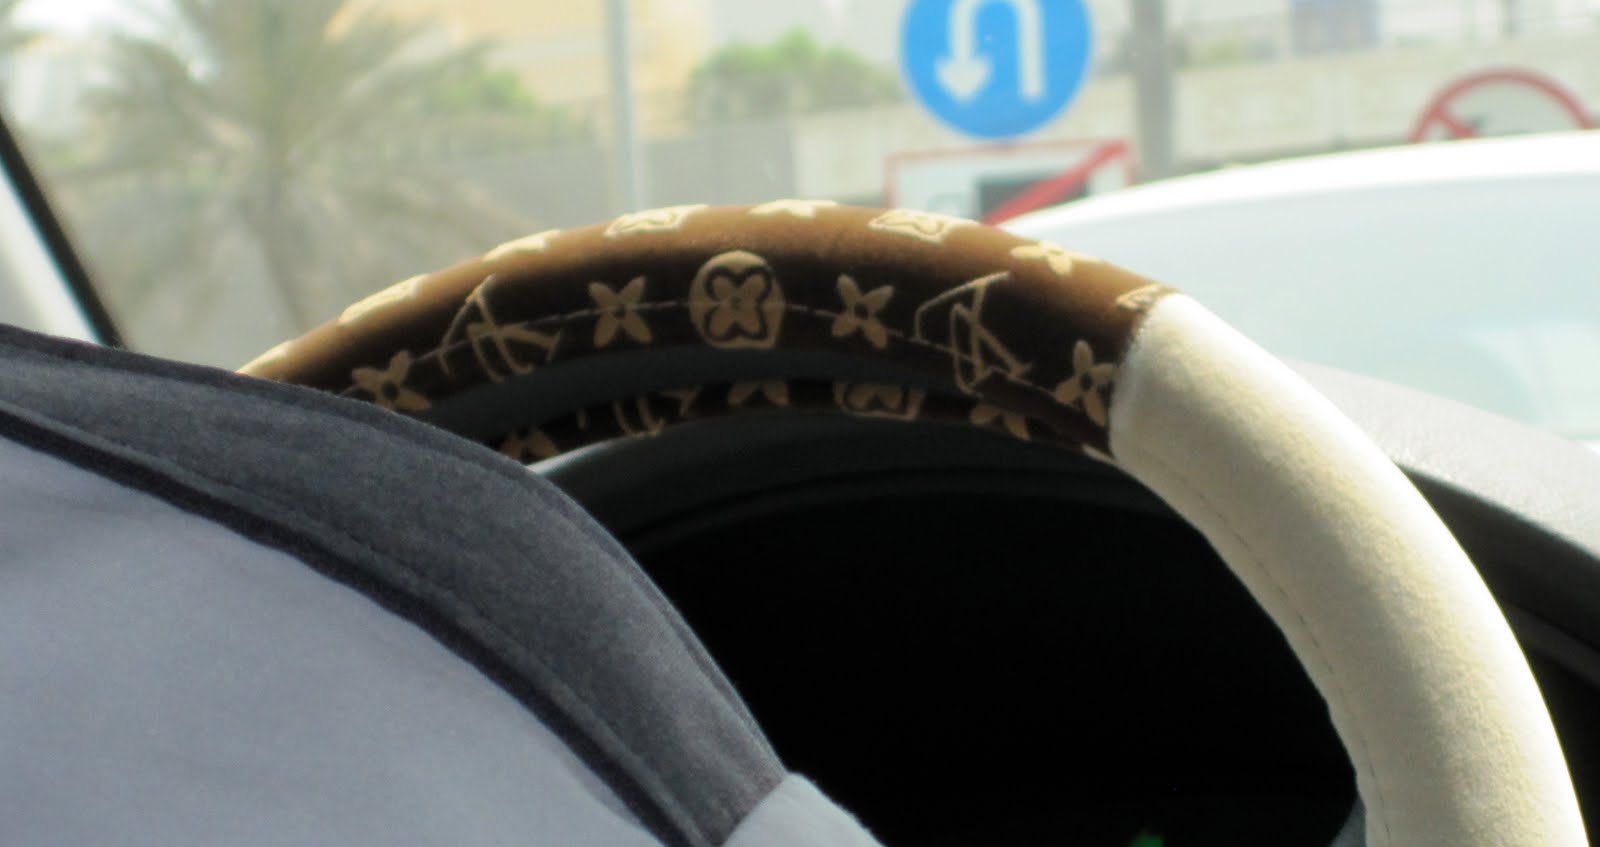 A Canadian in Abu Dhabi, UAE: Cab sports velour Louis Vuitton steering  wheel cover